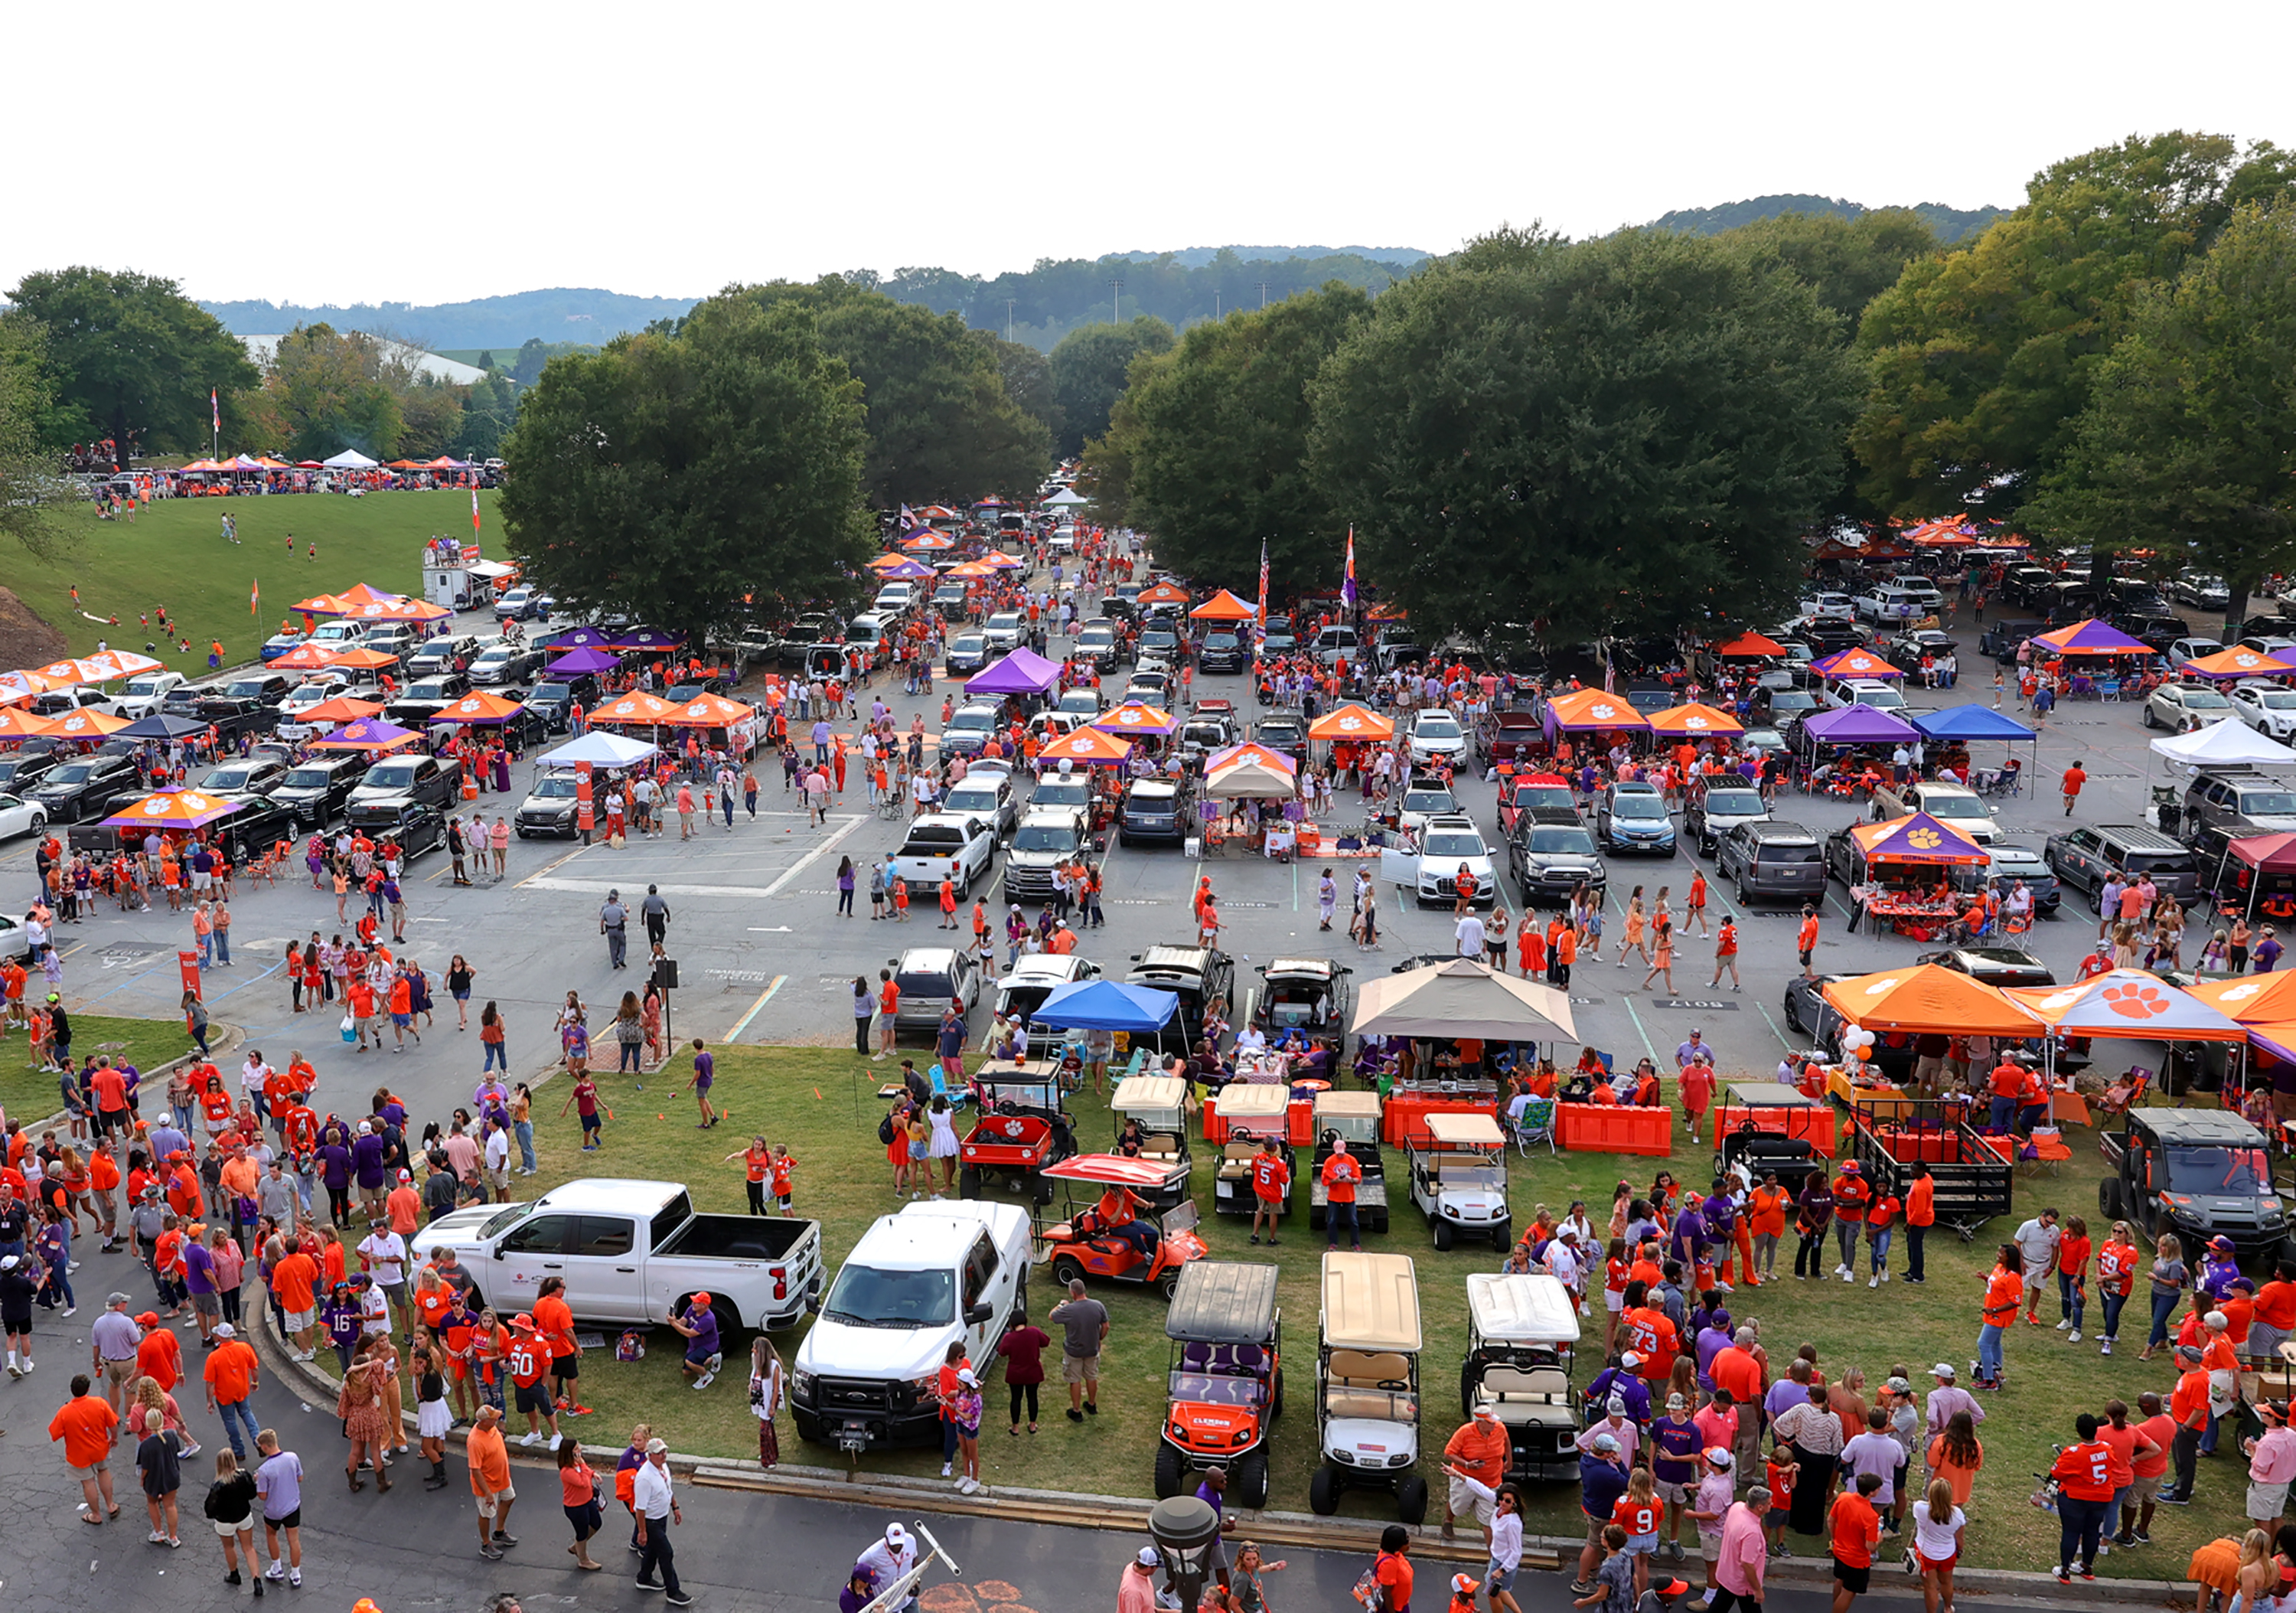 CLEMSON, SC -OCTOBER 02: The Clemson Tigers fans tailgate before a college football game between the Boston College Eagles and the Clemson Tigers on October 2, 2021 at Clemson Memorial Stadium in Clemson, S.C. 